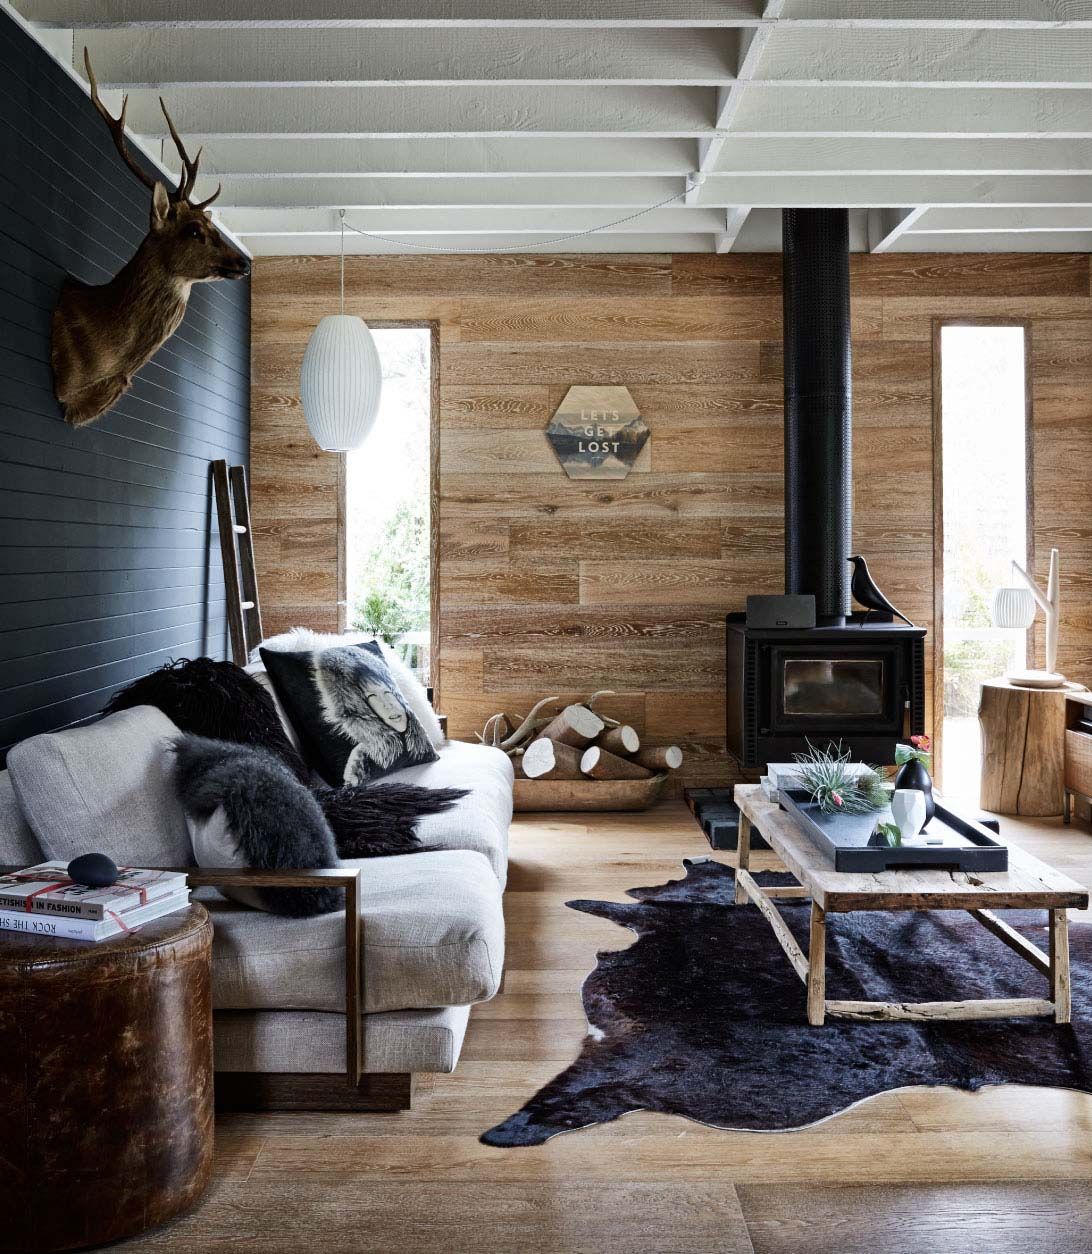 Choosing Decor For A Lodge Or Cabin With A Rustic Theme – Muskoka Lifestyle  Products